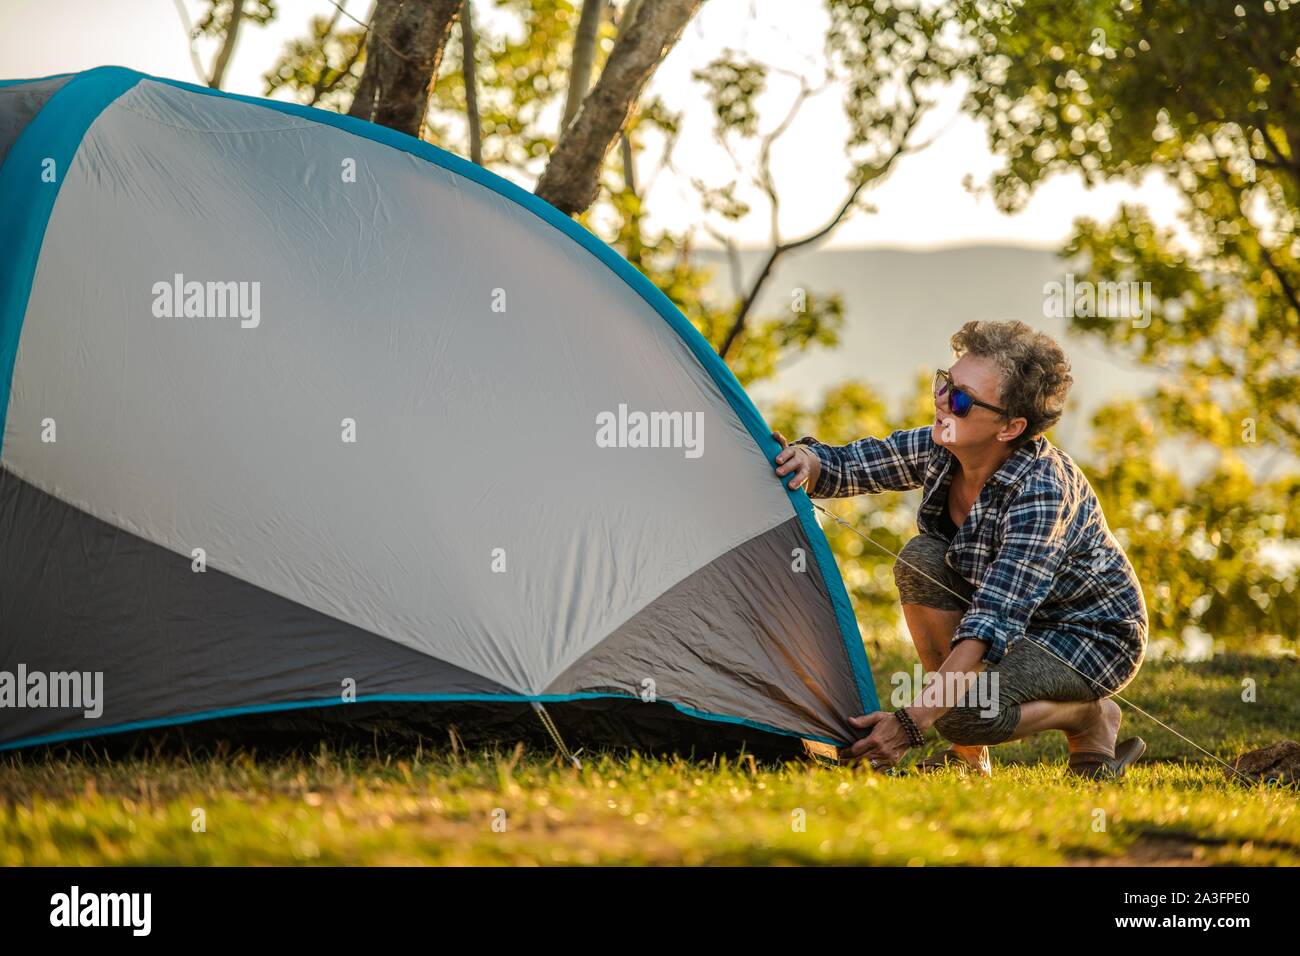 Summer Vacation in a Tent. Retired Caucasian Woman in Her 60s Preparing Her Tent Checking Material Tension. Stock Photo